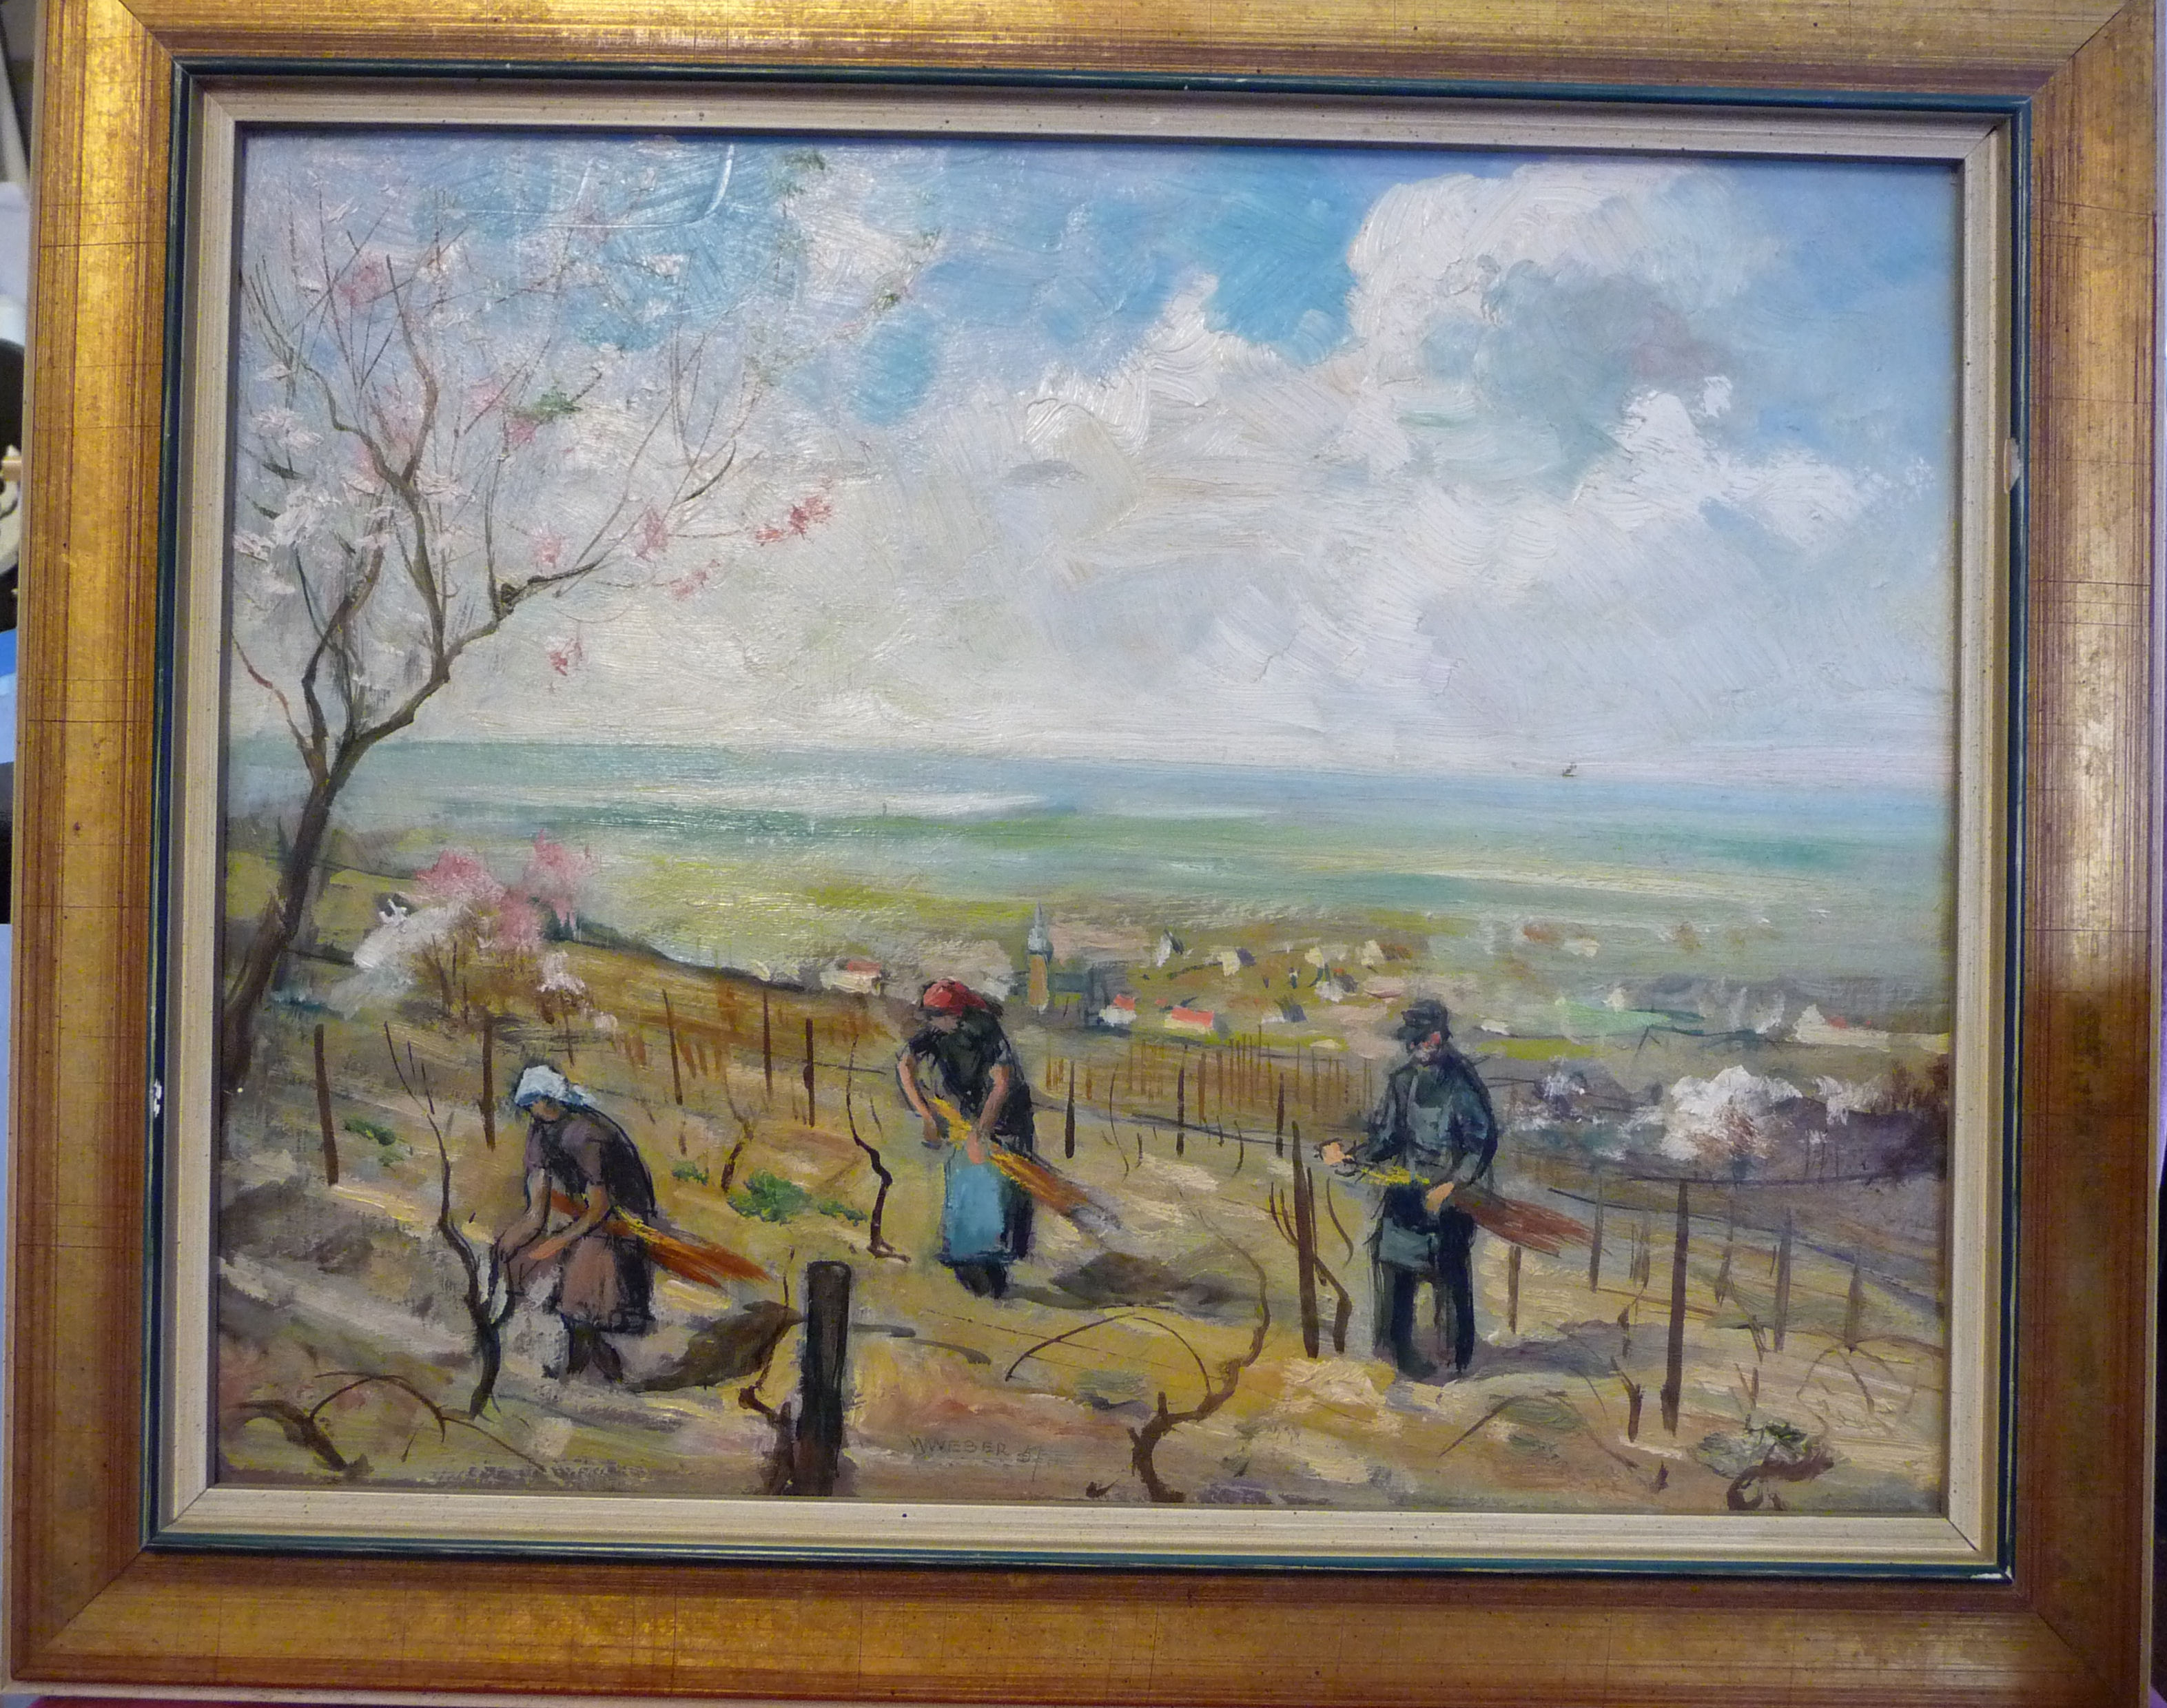 Willy Weber - 'At the vine binding' a landscape with vineyard workers in the foreground on a